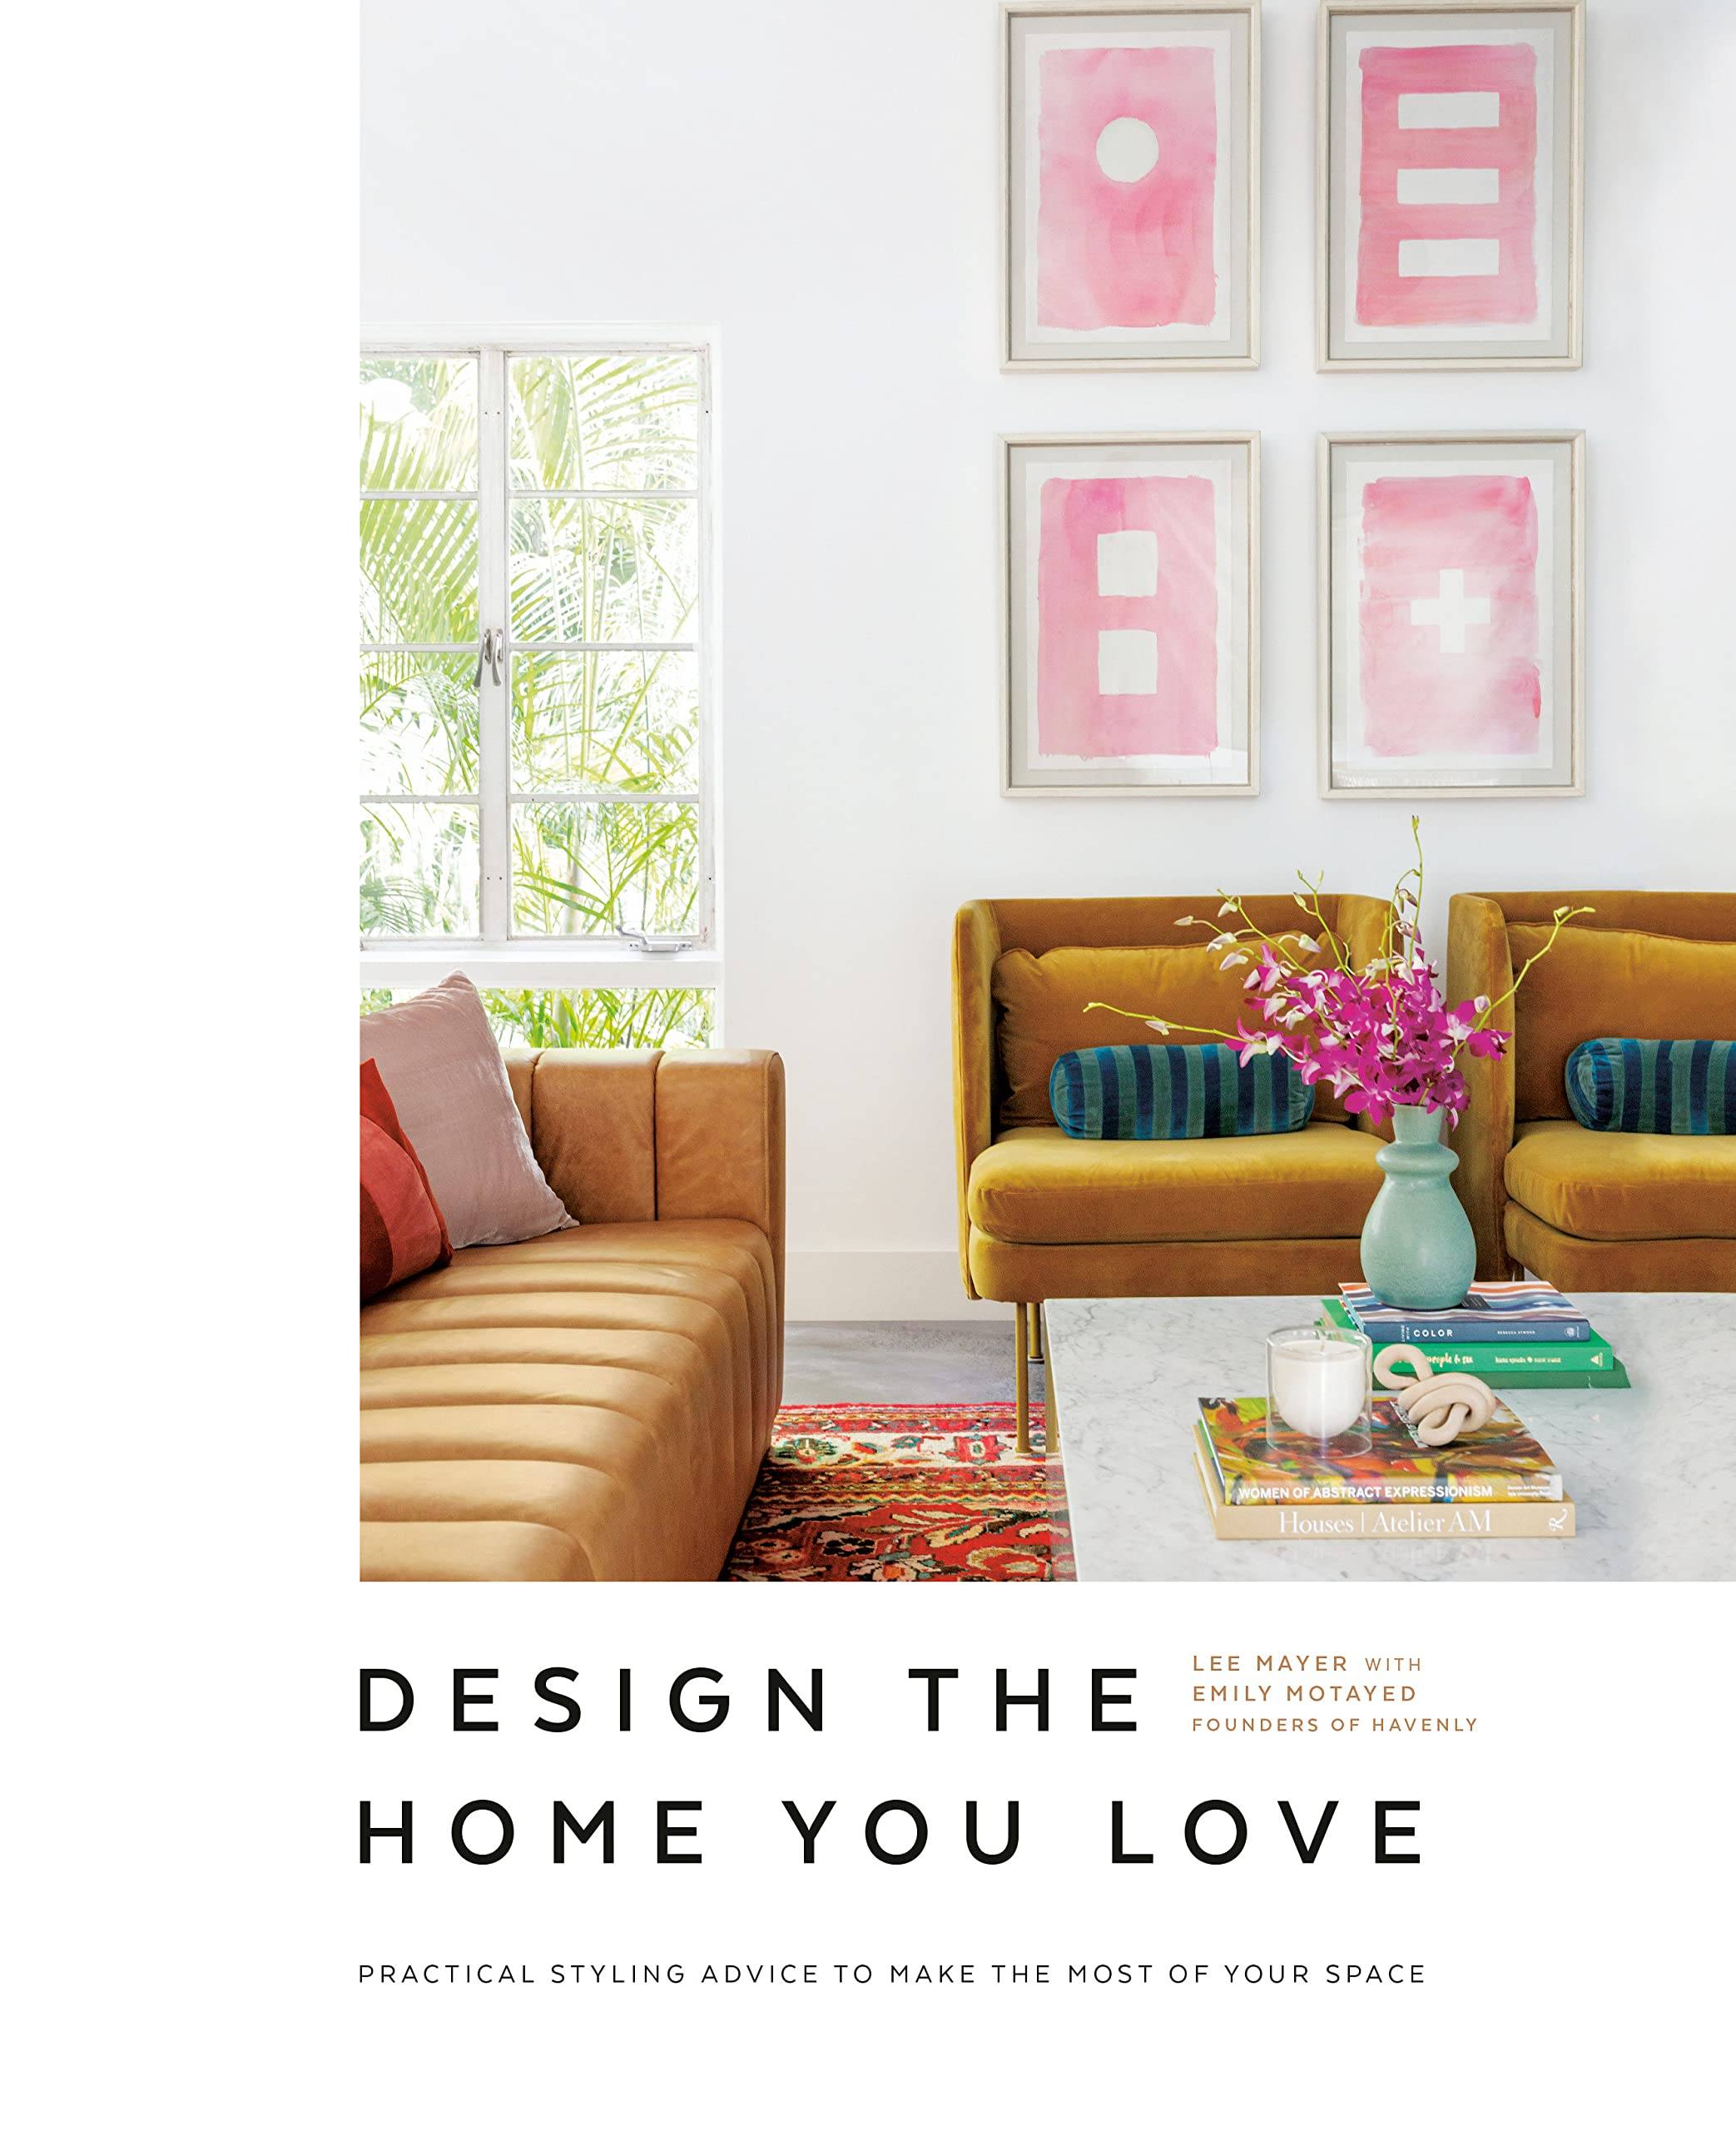 Design the Home You Love- Practical Styling Advice to Make the Most of Your Space [By Lee Mayer with Emily Motaved]